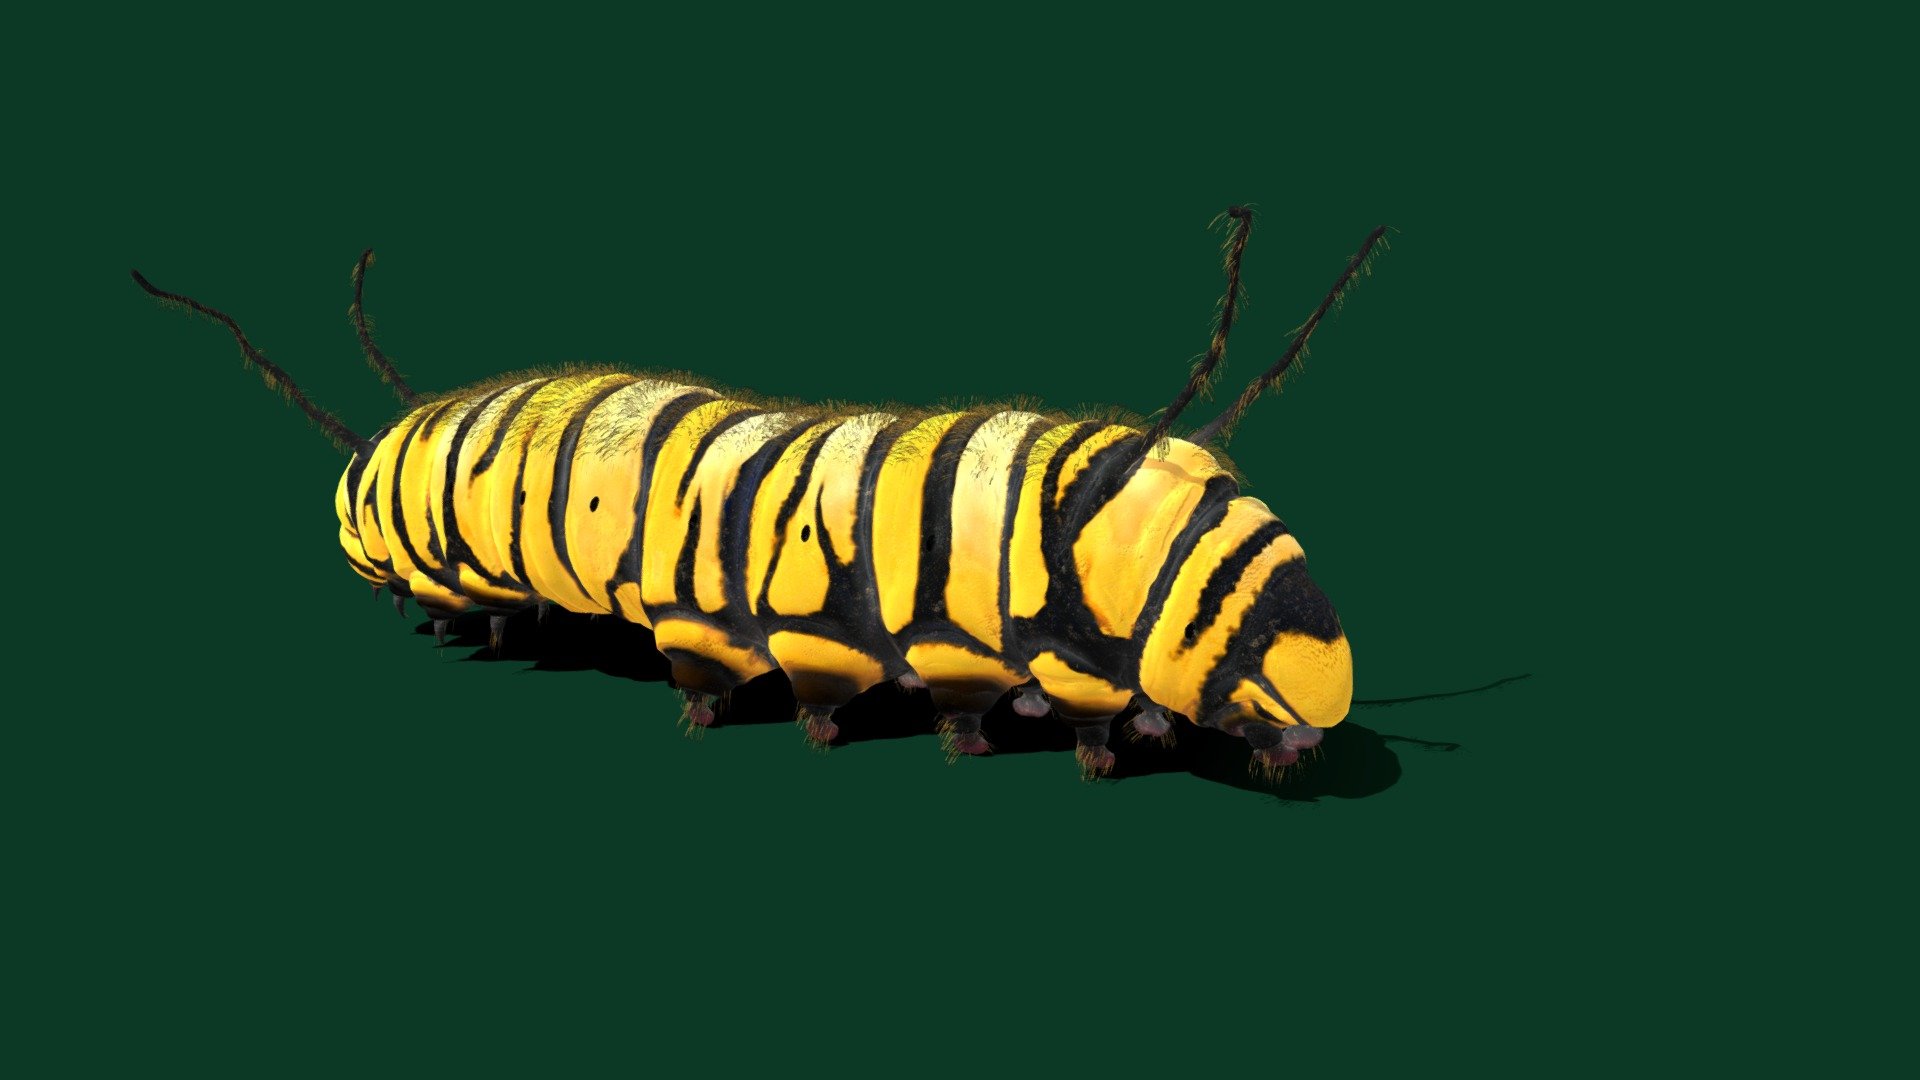 🐛 
Caterpillars are the larval stage of members of the order Lepidoptera. As with most common names, the application of the word is arbitrary, since the larvae of sawflies are commonly called caterpillars as well. Both lepidopteran and symphytan larvae have eruciform body shapes 3d model